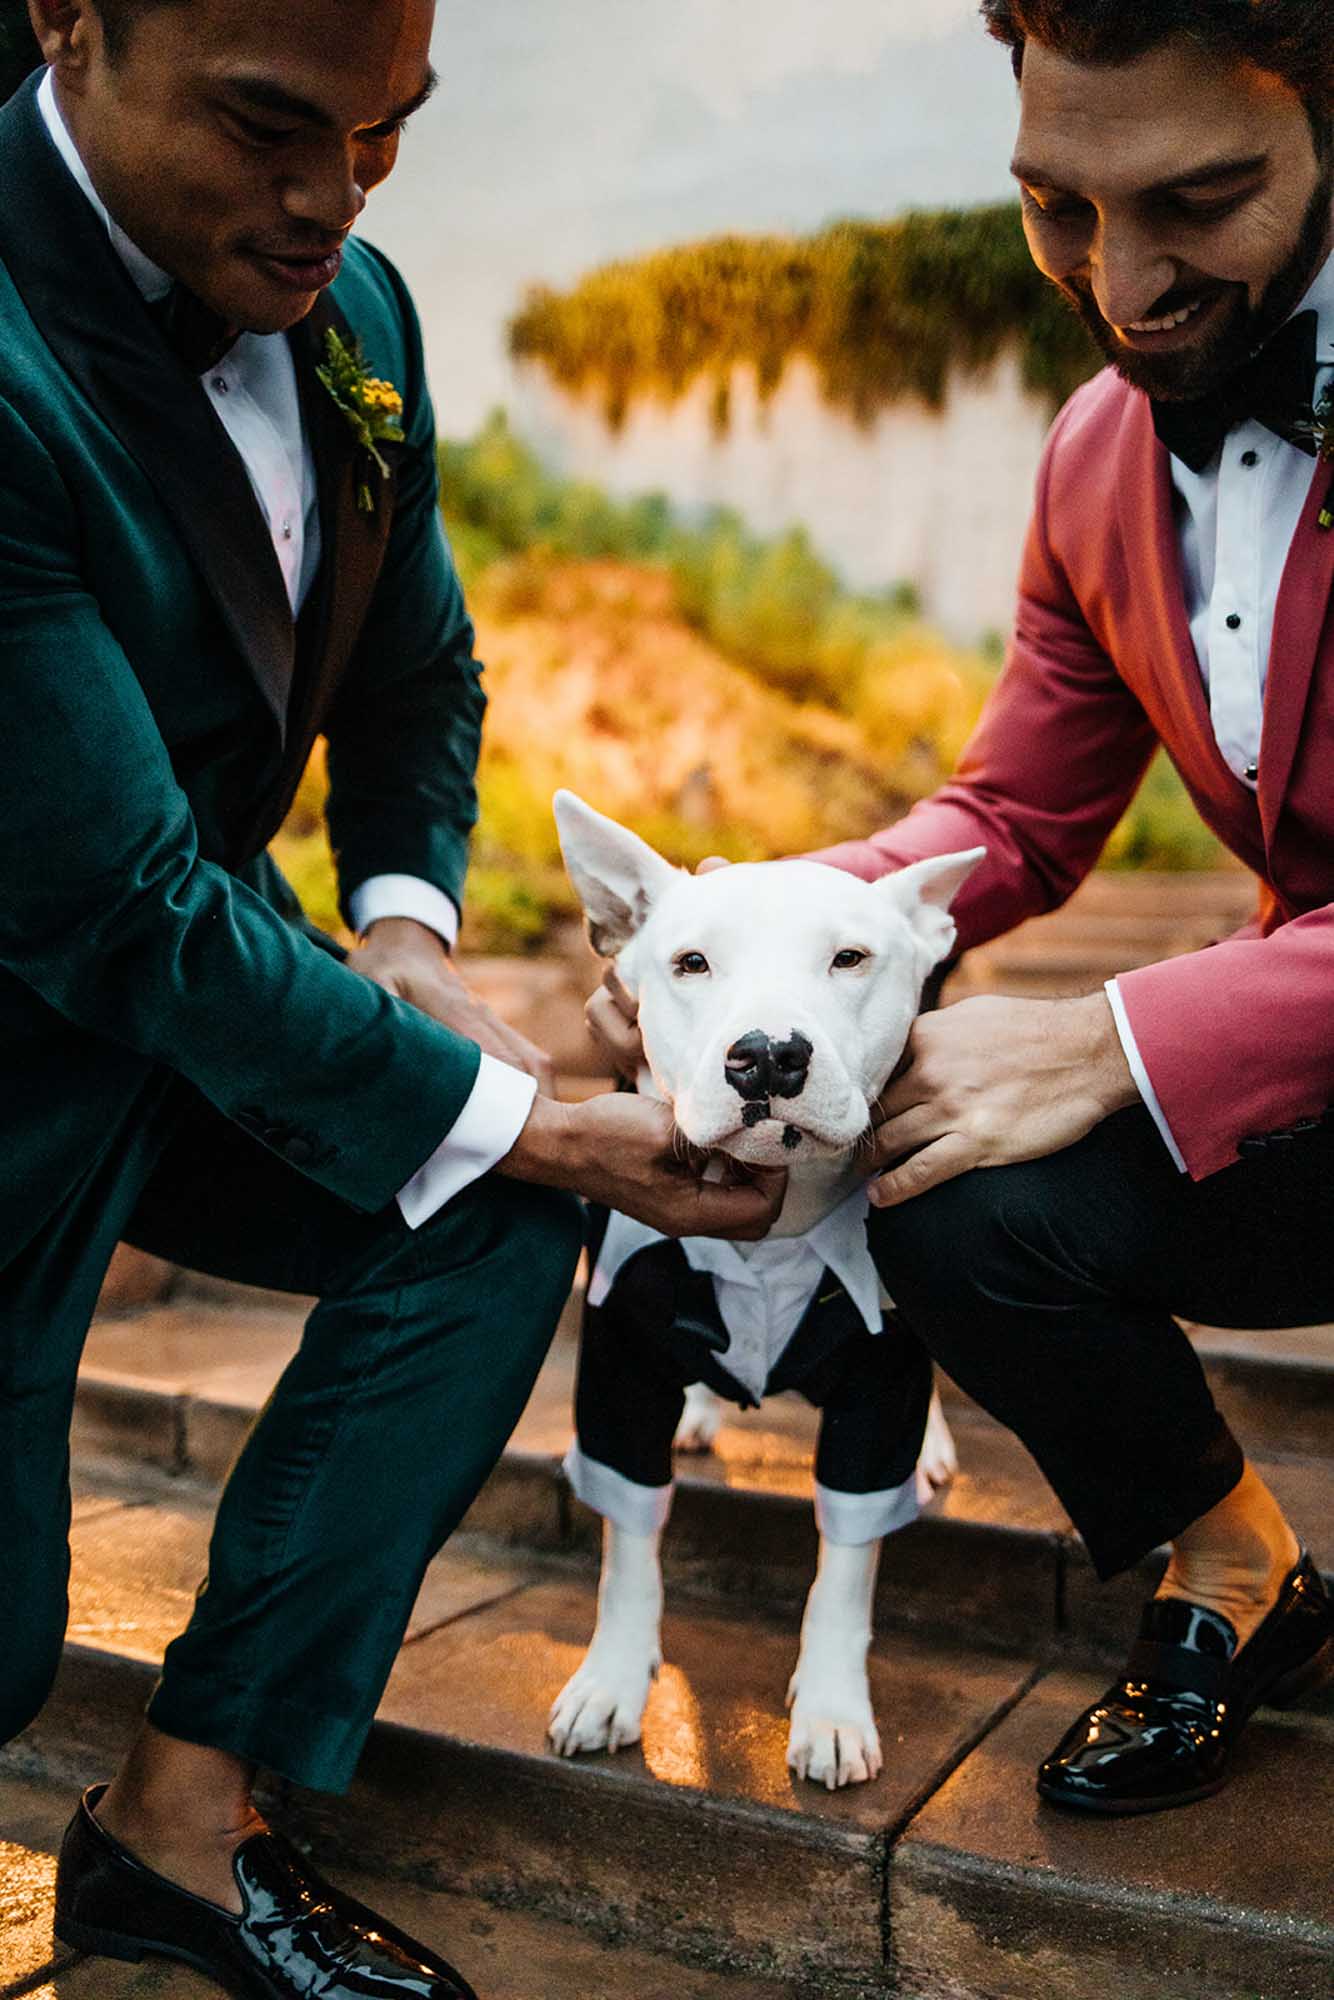 A white dog in a tuxedo sits between two grooms in green and pink suits.